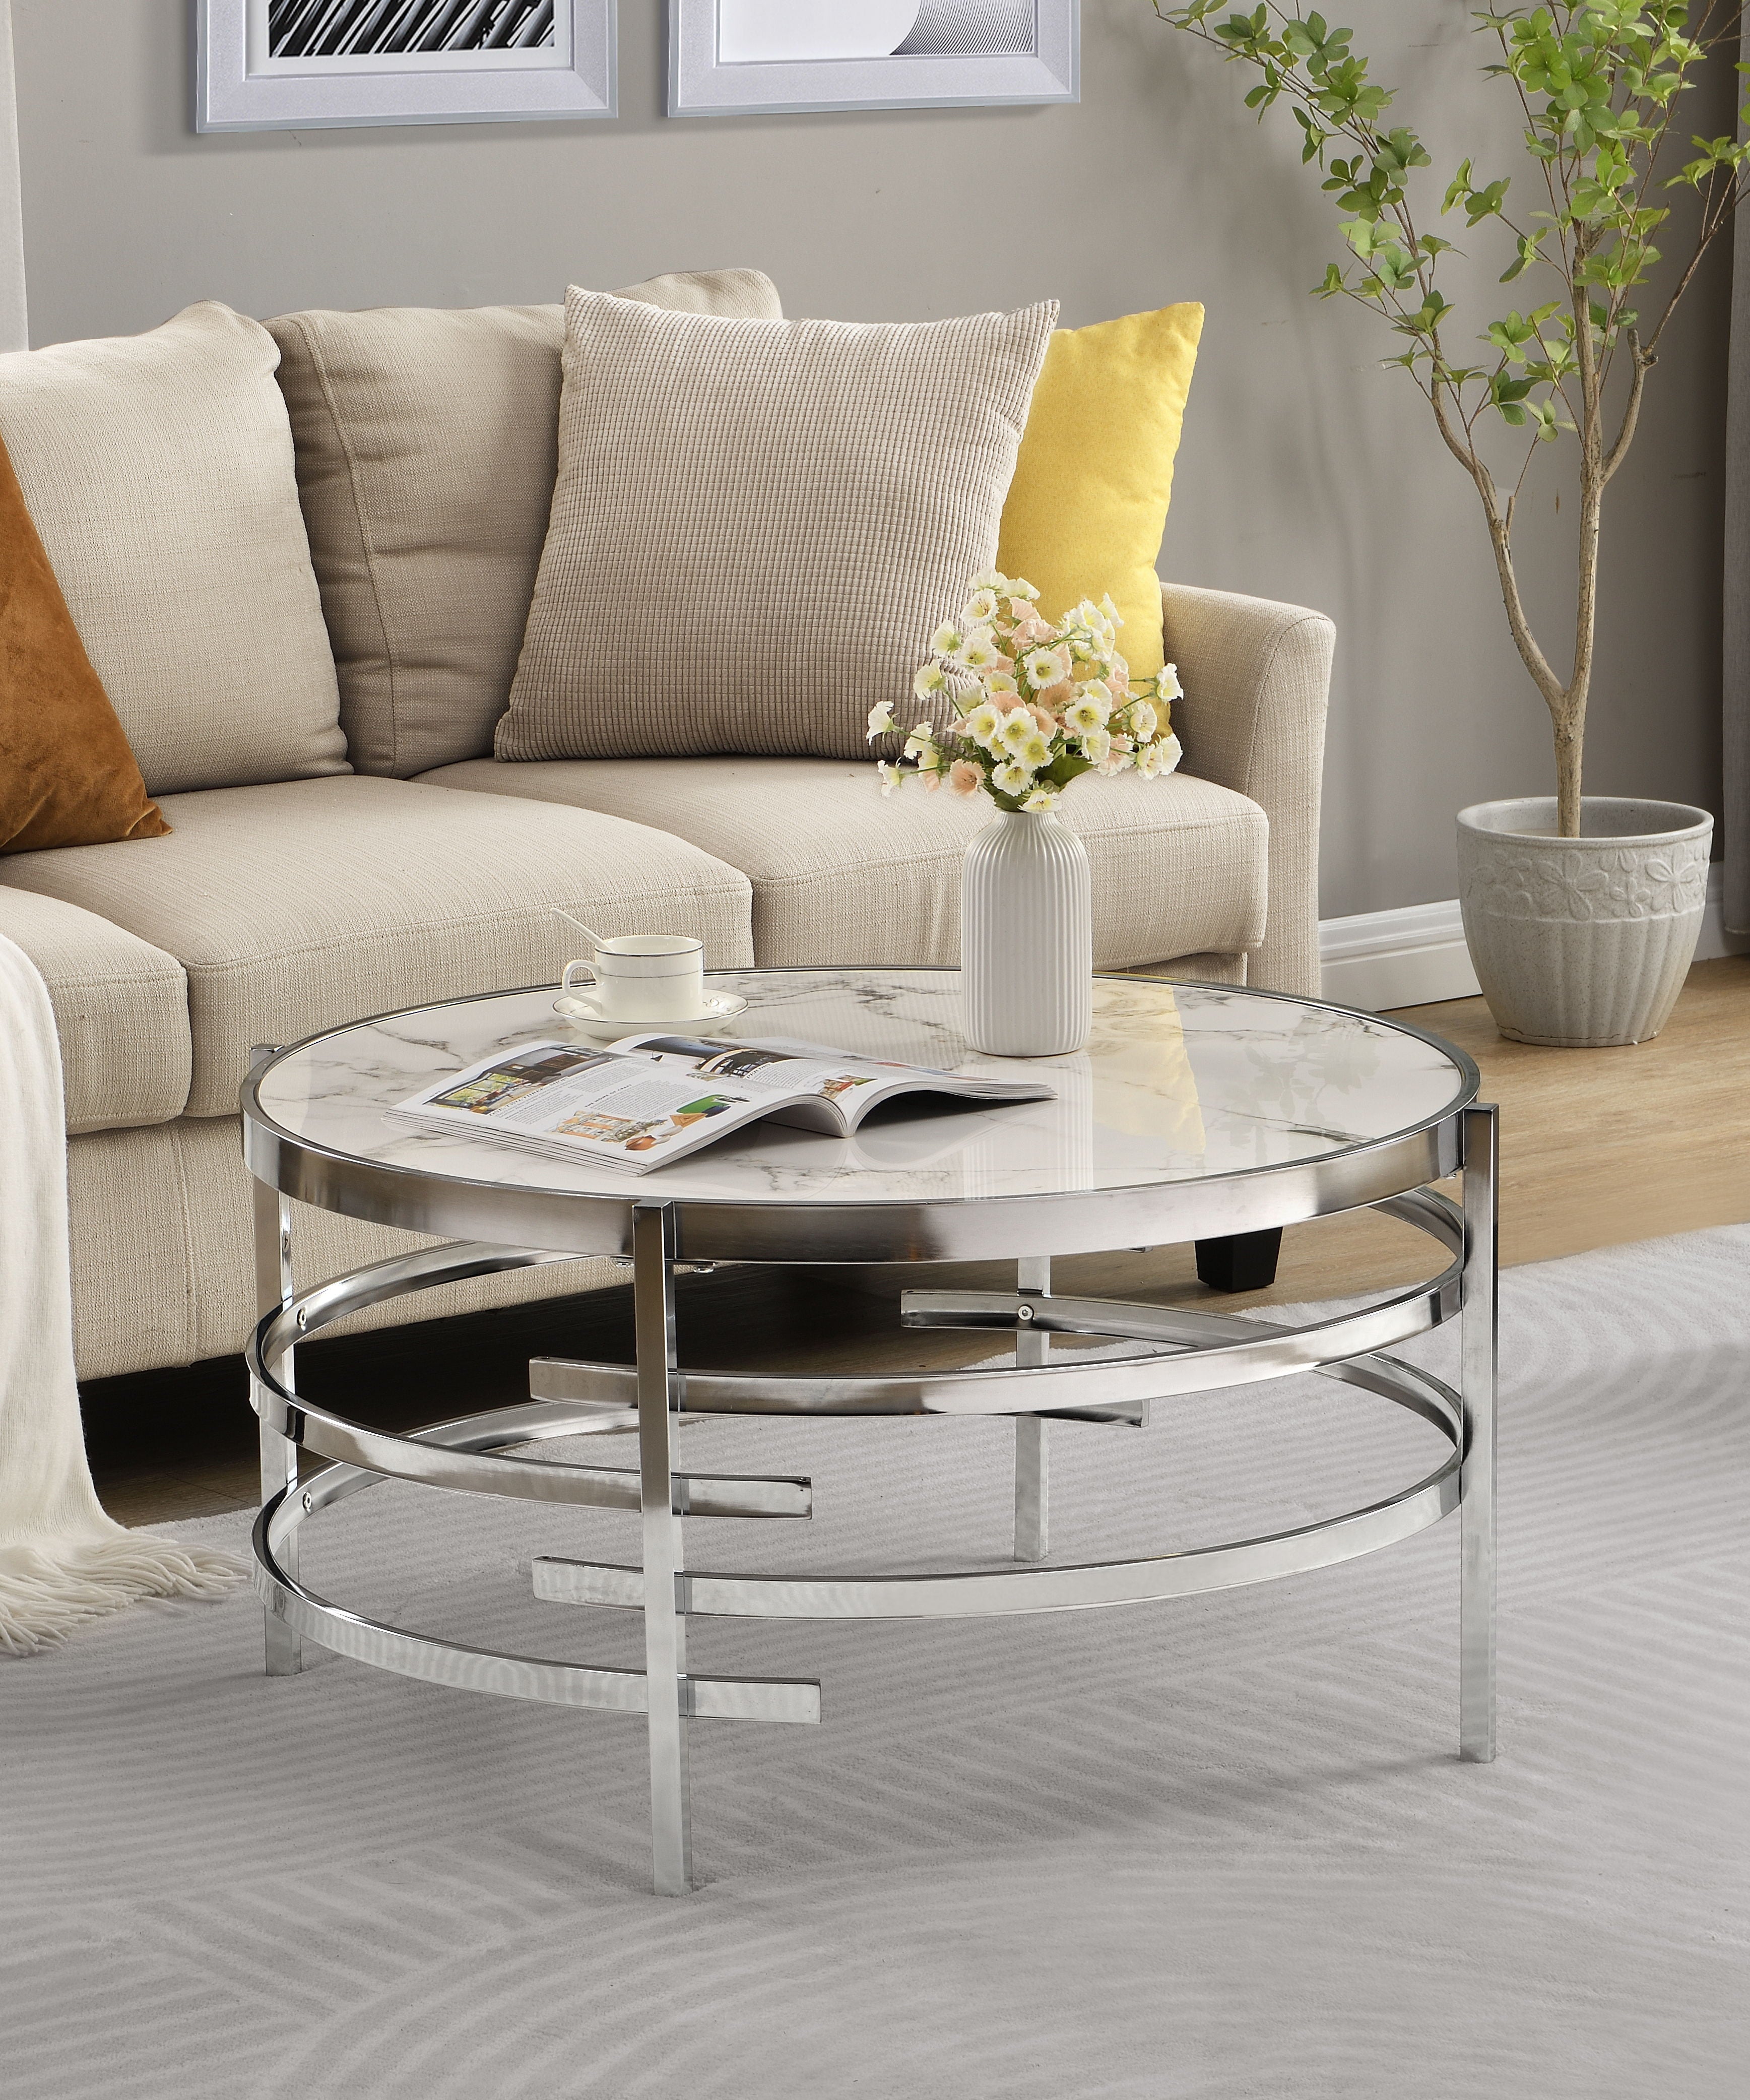 32.48'' Chrome Round Coffee Table With Sintered Stone Top&Sturdy Metal Frame, Modern Coffee Table For Living Room - Silver